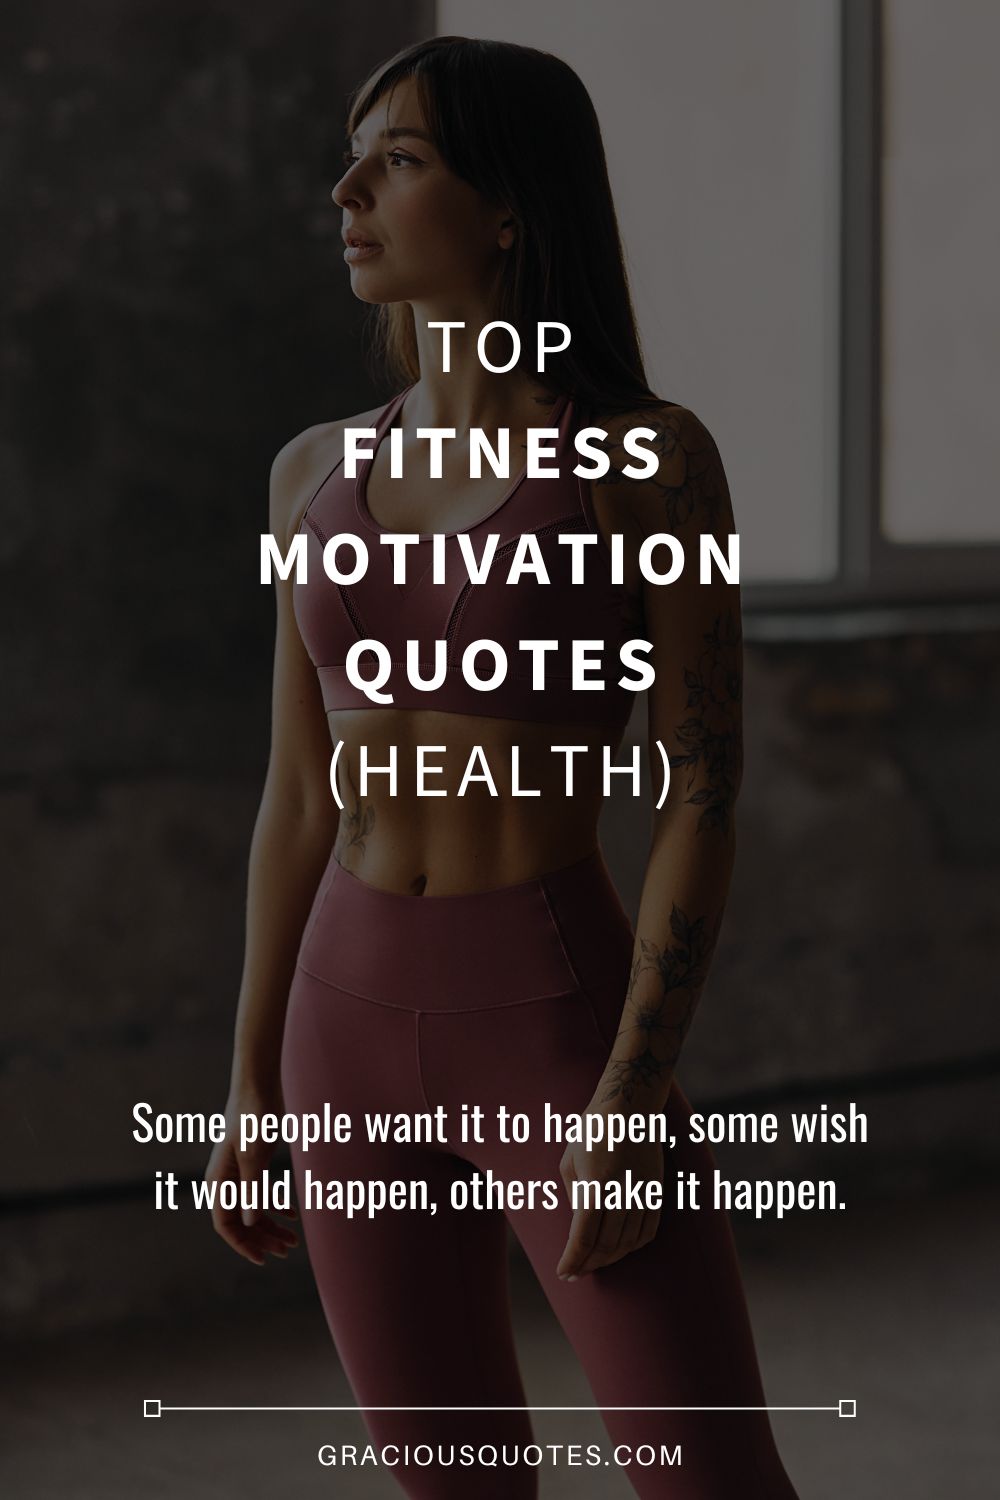 Health and Fitness Quotes